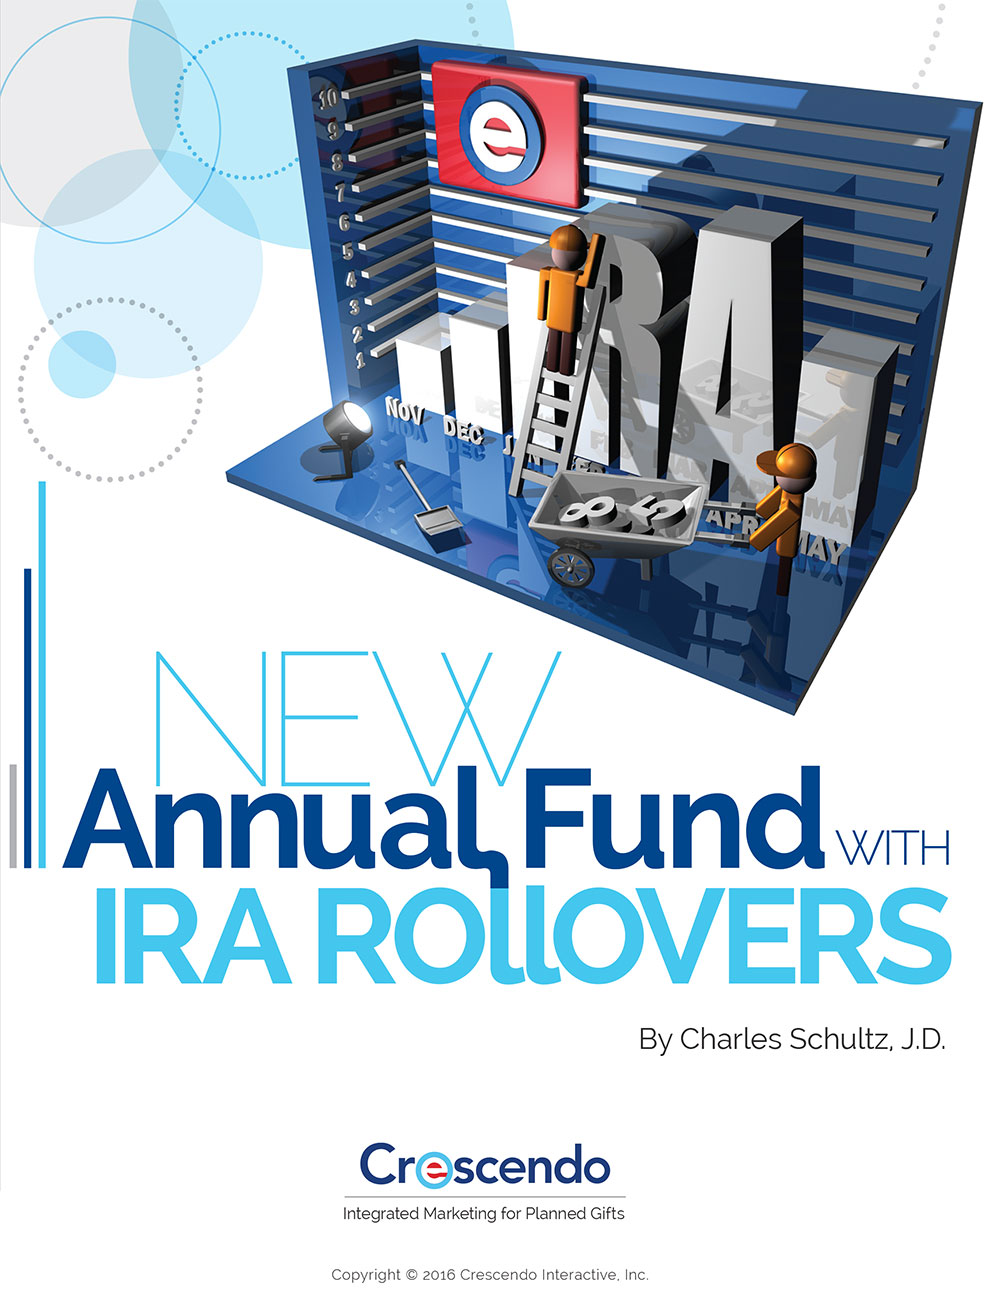 New Annual Fund with IRA Rollovers